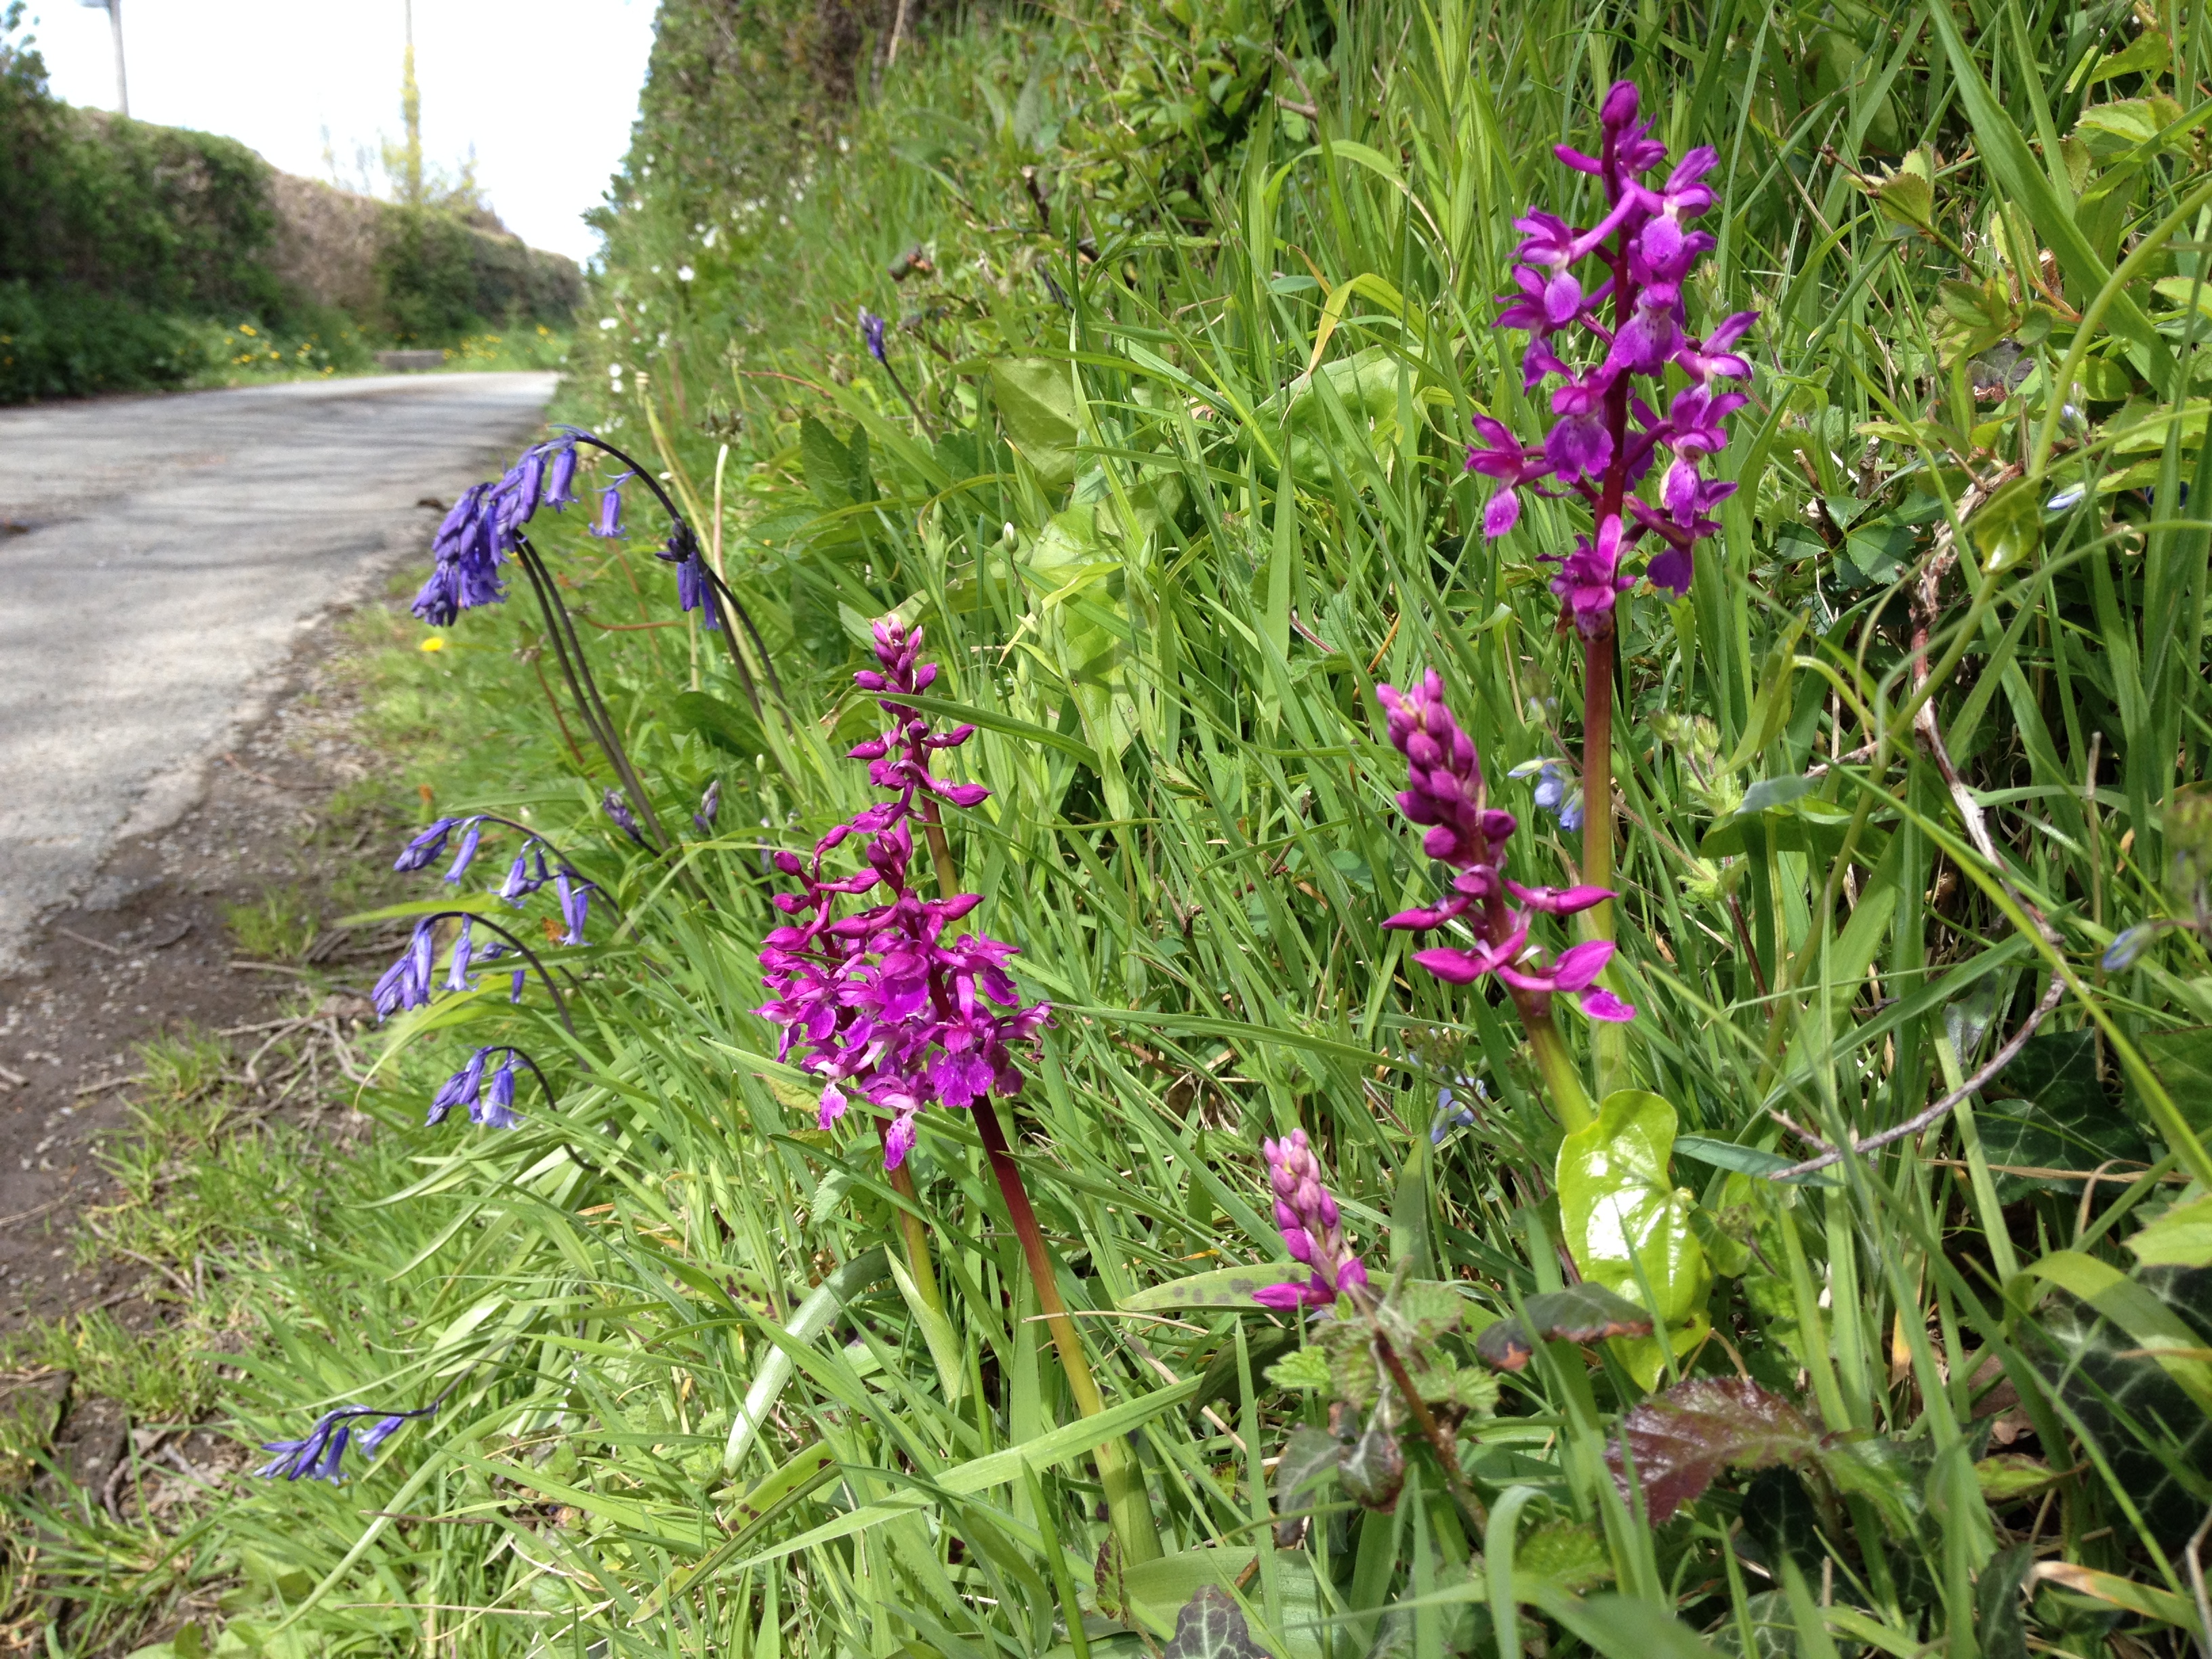 Early purple orchid on road verge in Conwy north Wales (Trevor Dines/Plantlife/PA)